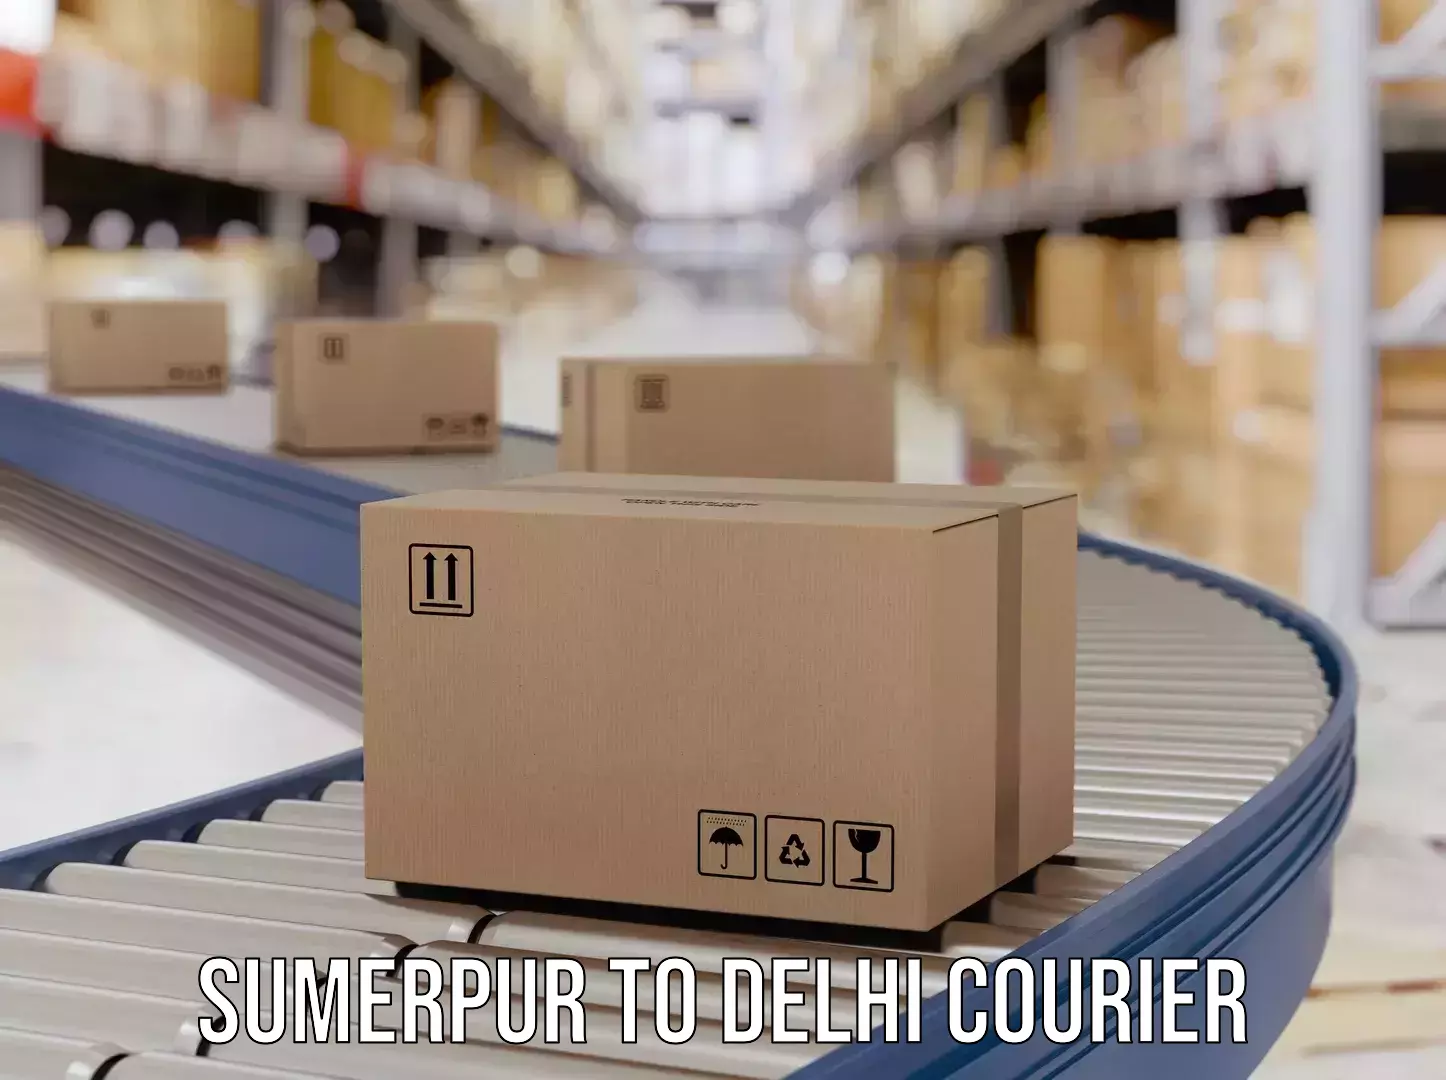 Same-day delivery options Sumerpur to Ramesh Nagar